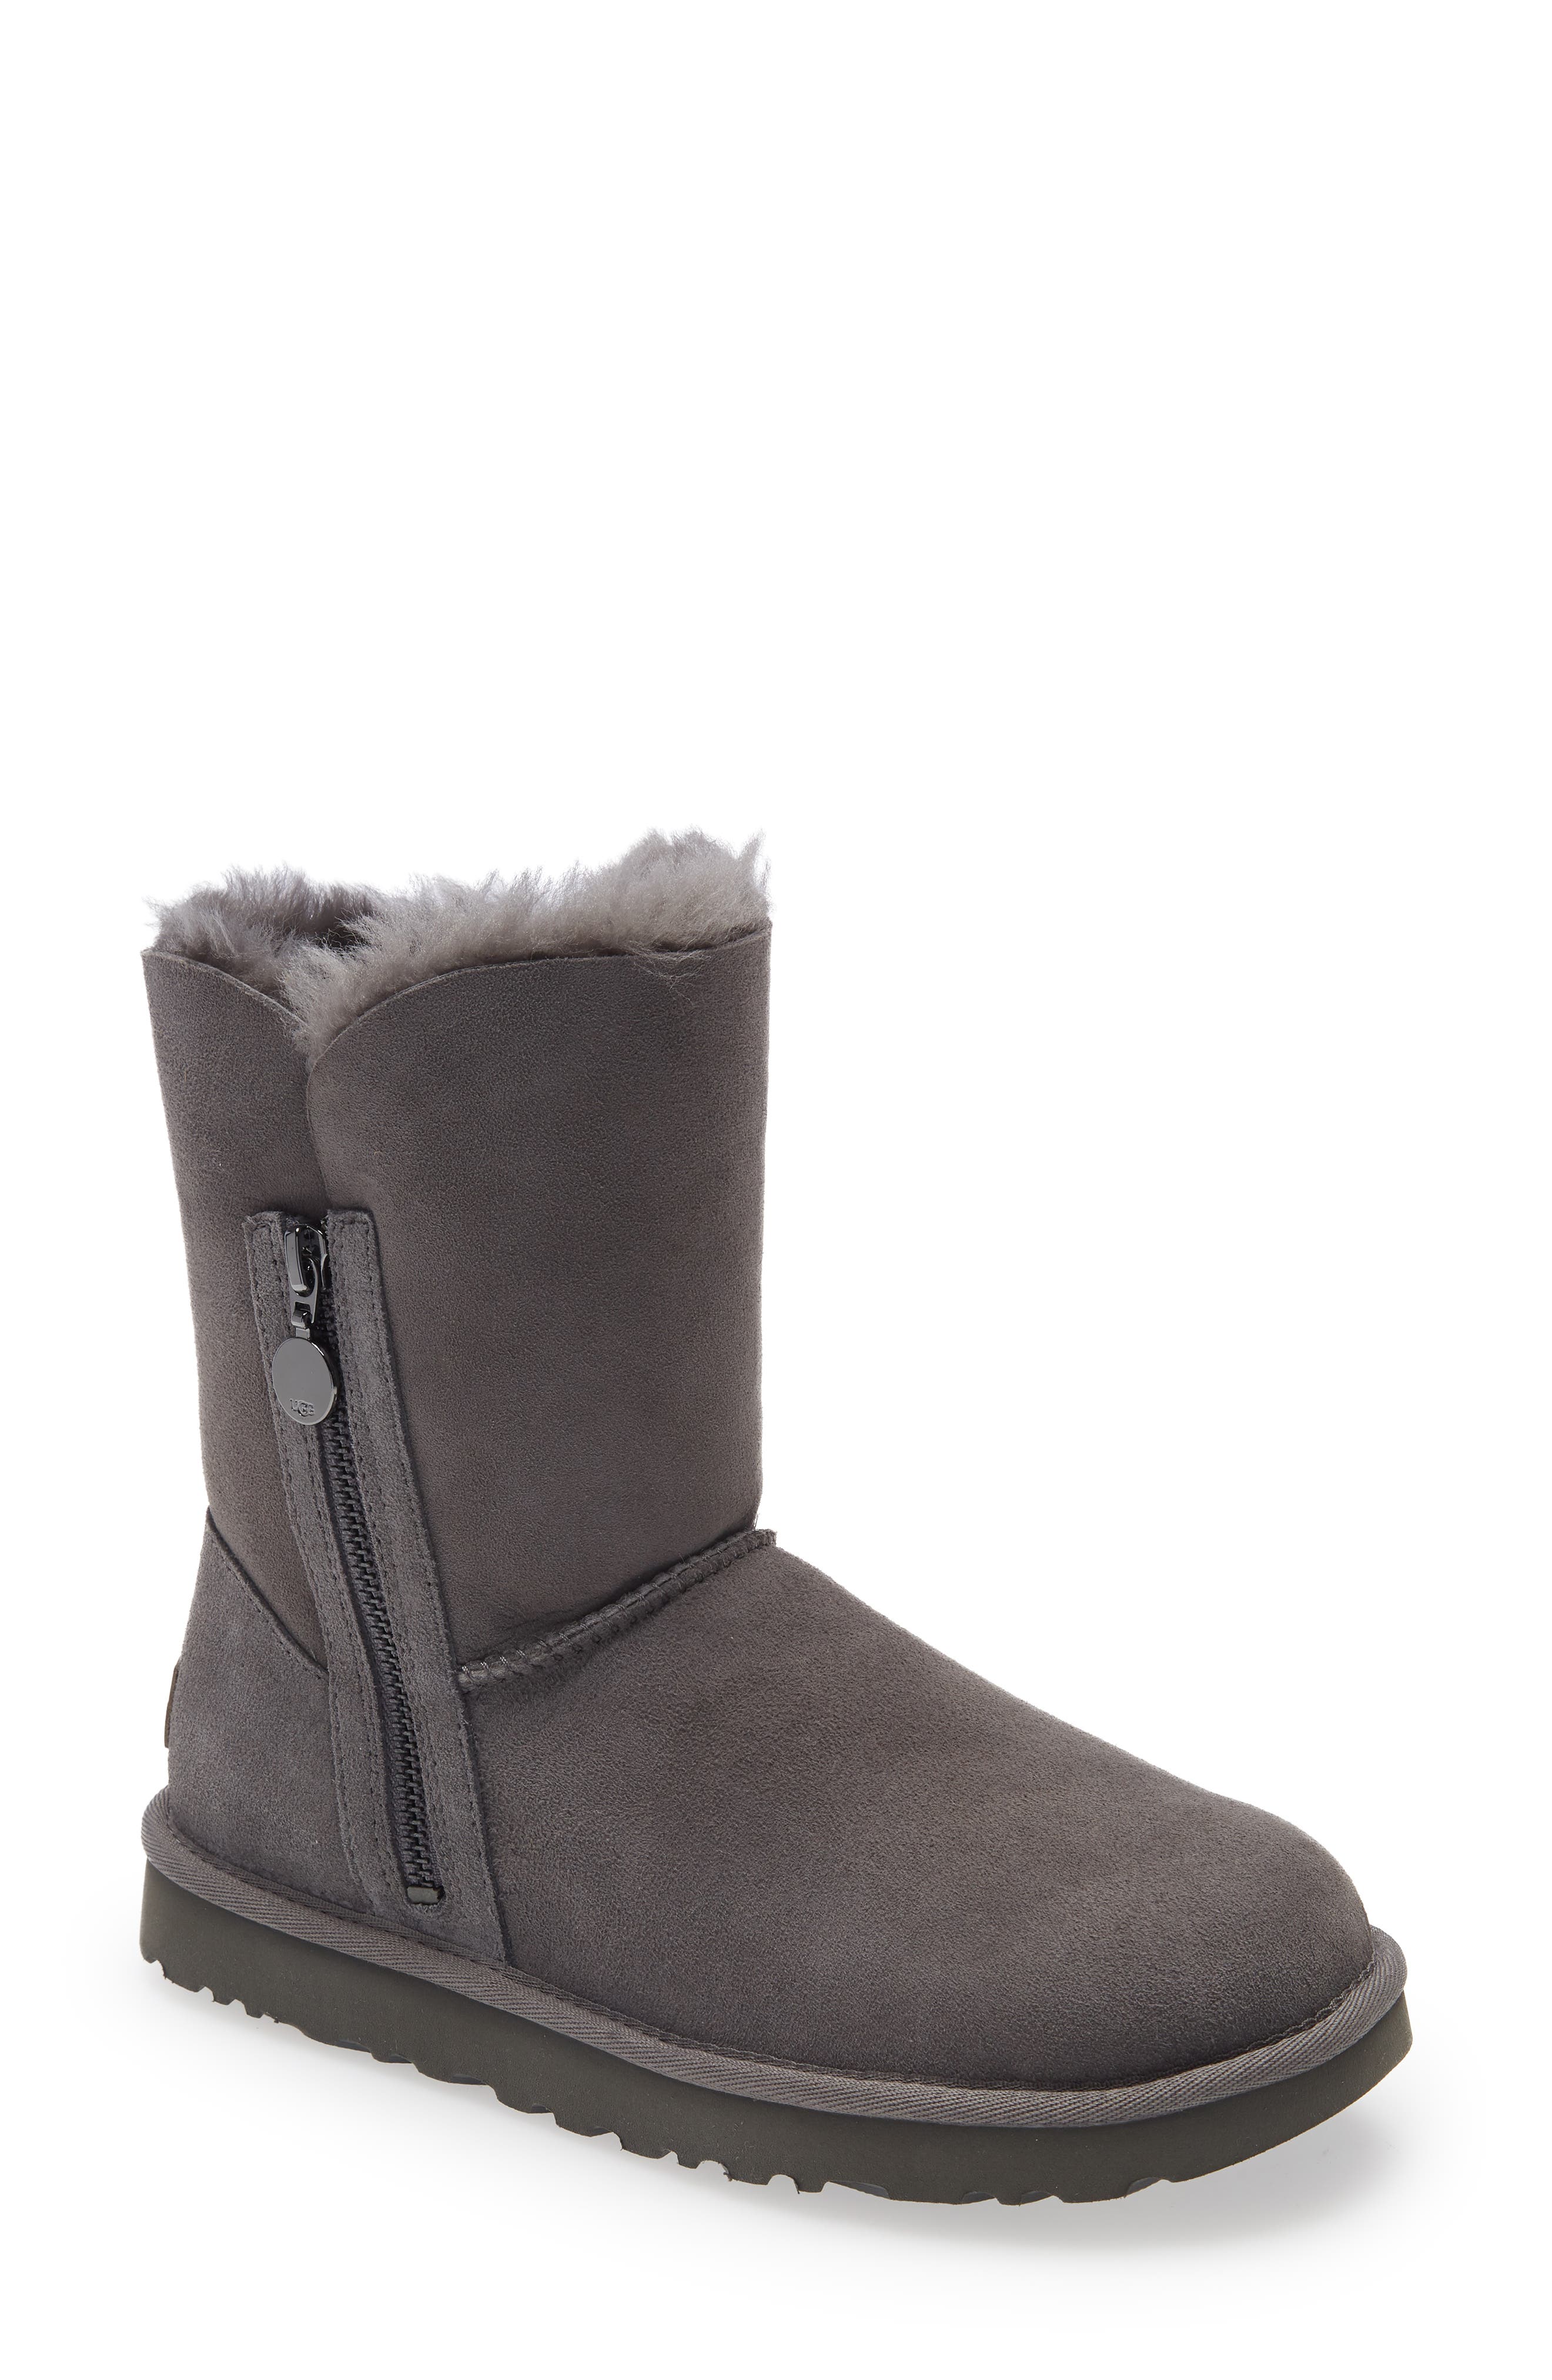 olive green ugg boots